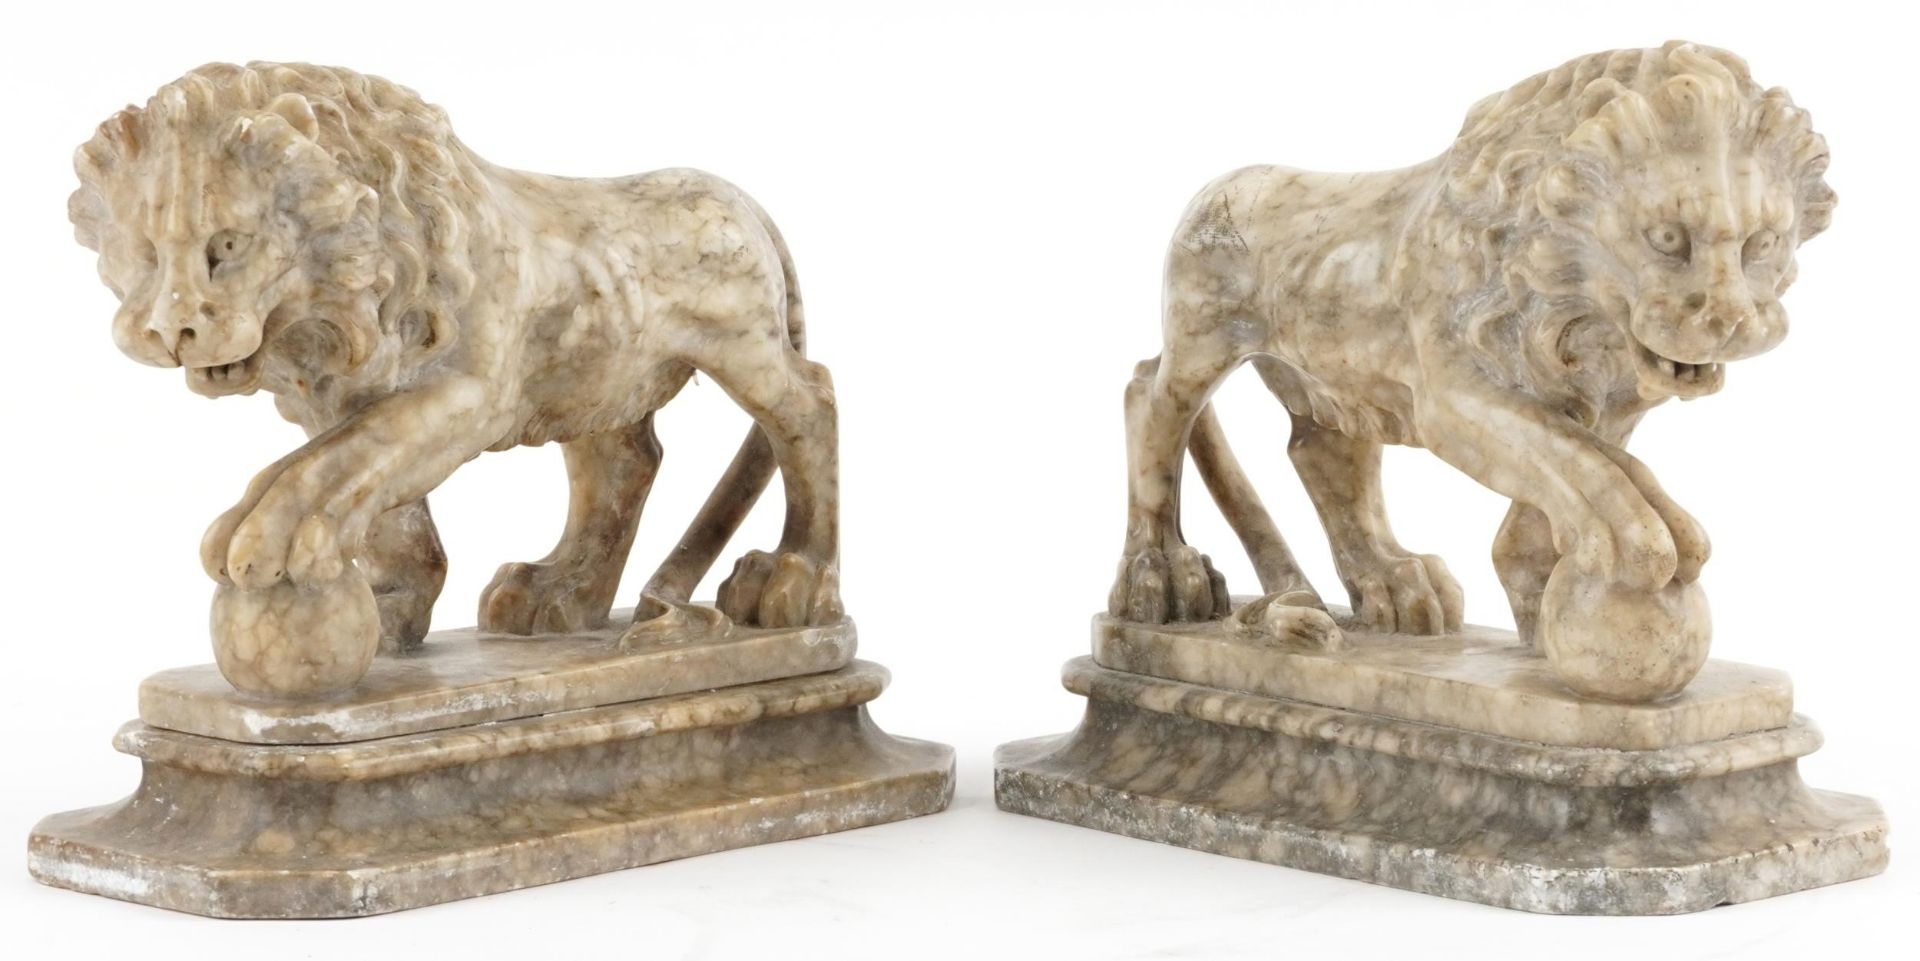 Pair of Grand Tour carved alabaster lions, each 24.5cm in length : For further information on this